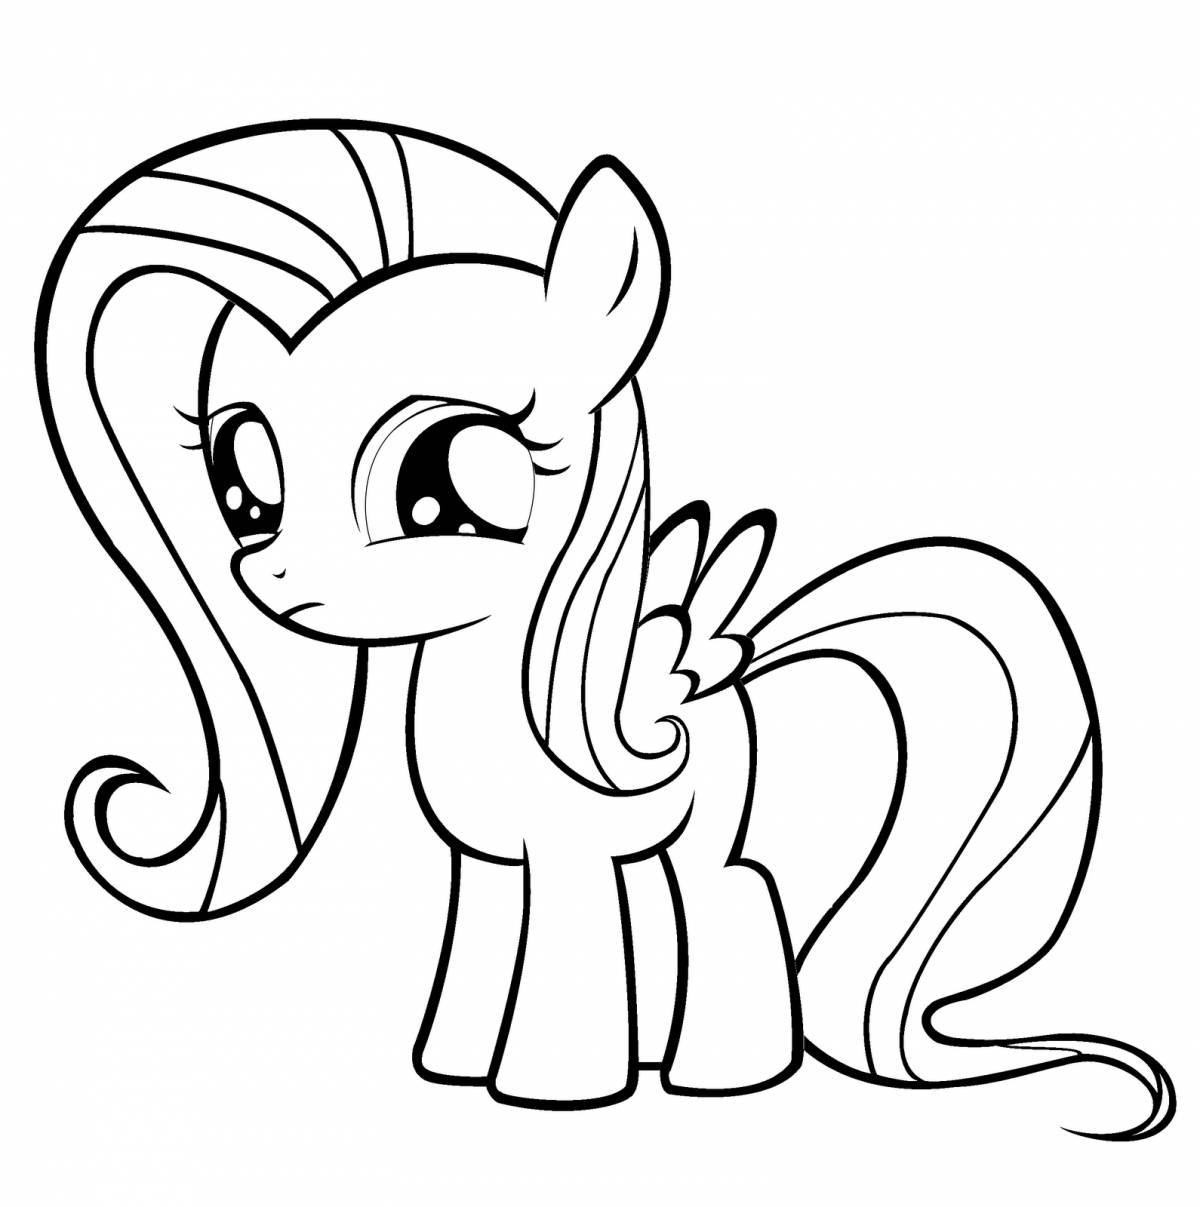 Sweet pony coloring for kids